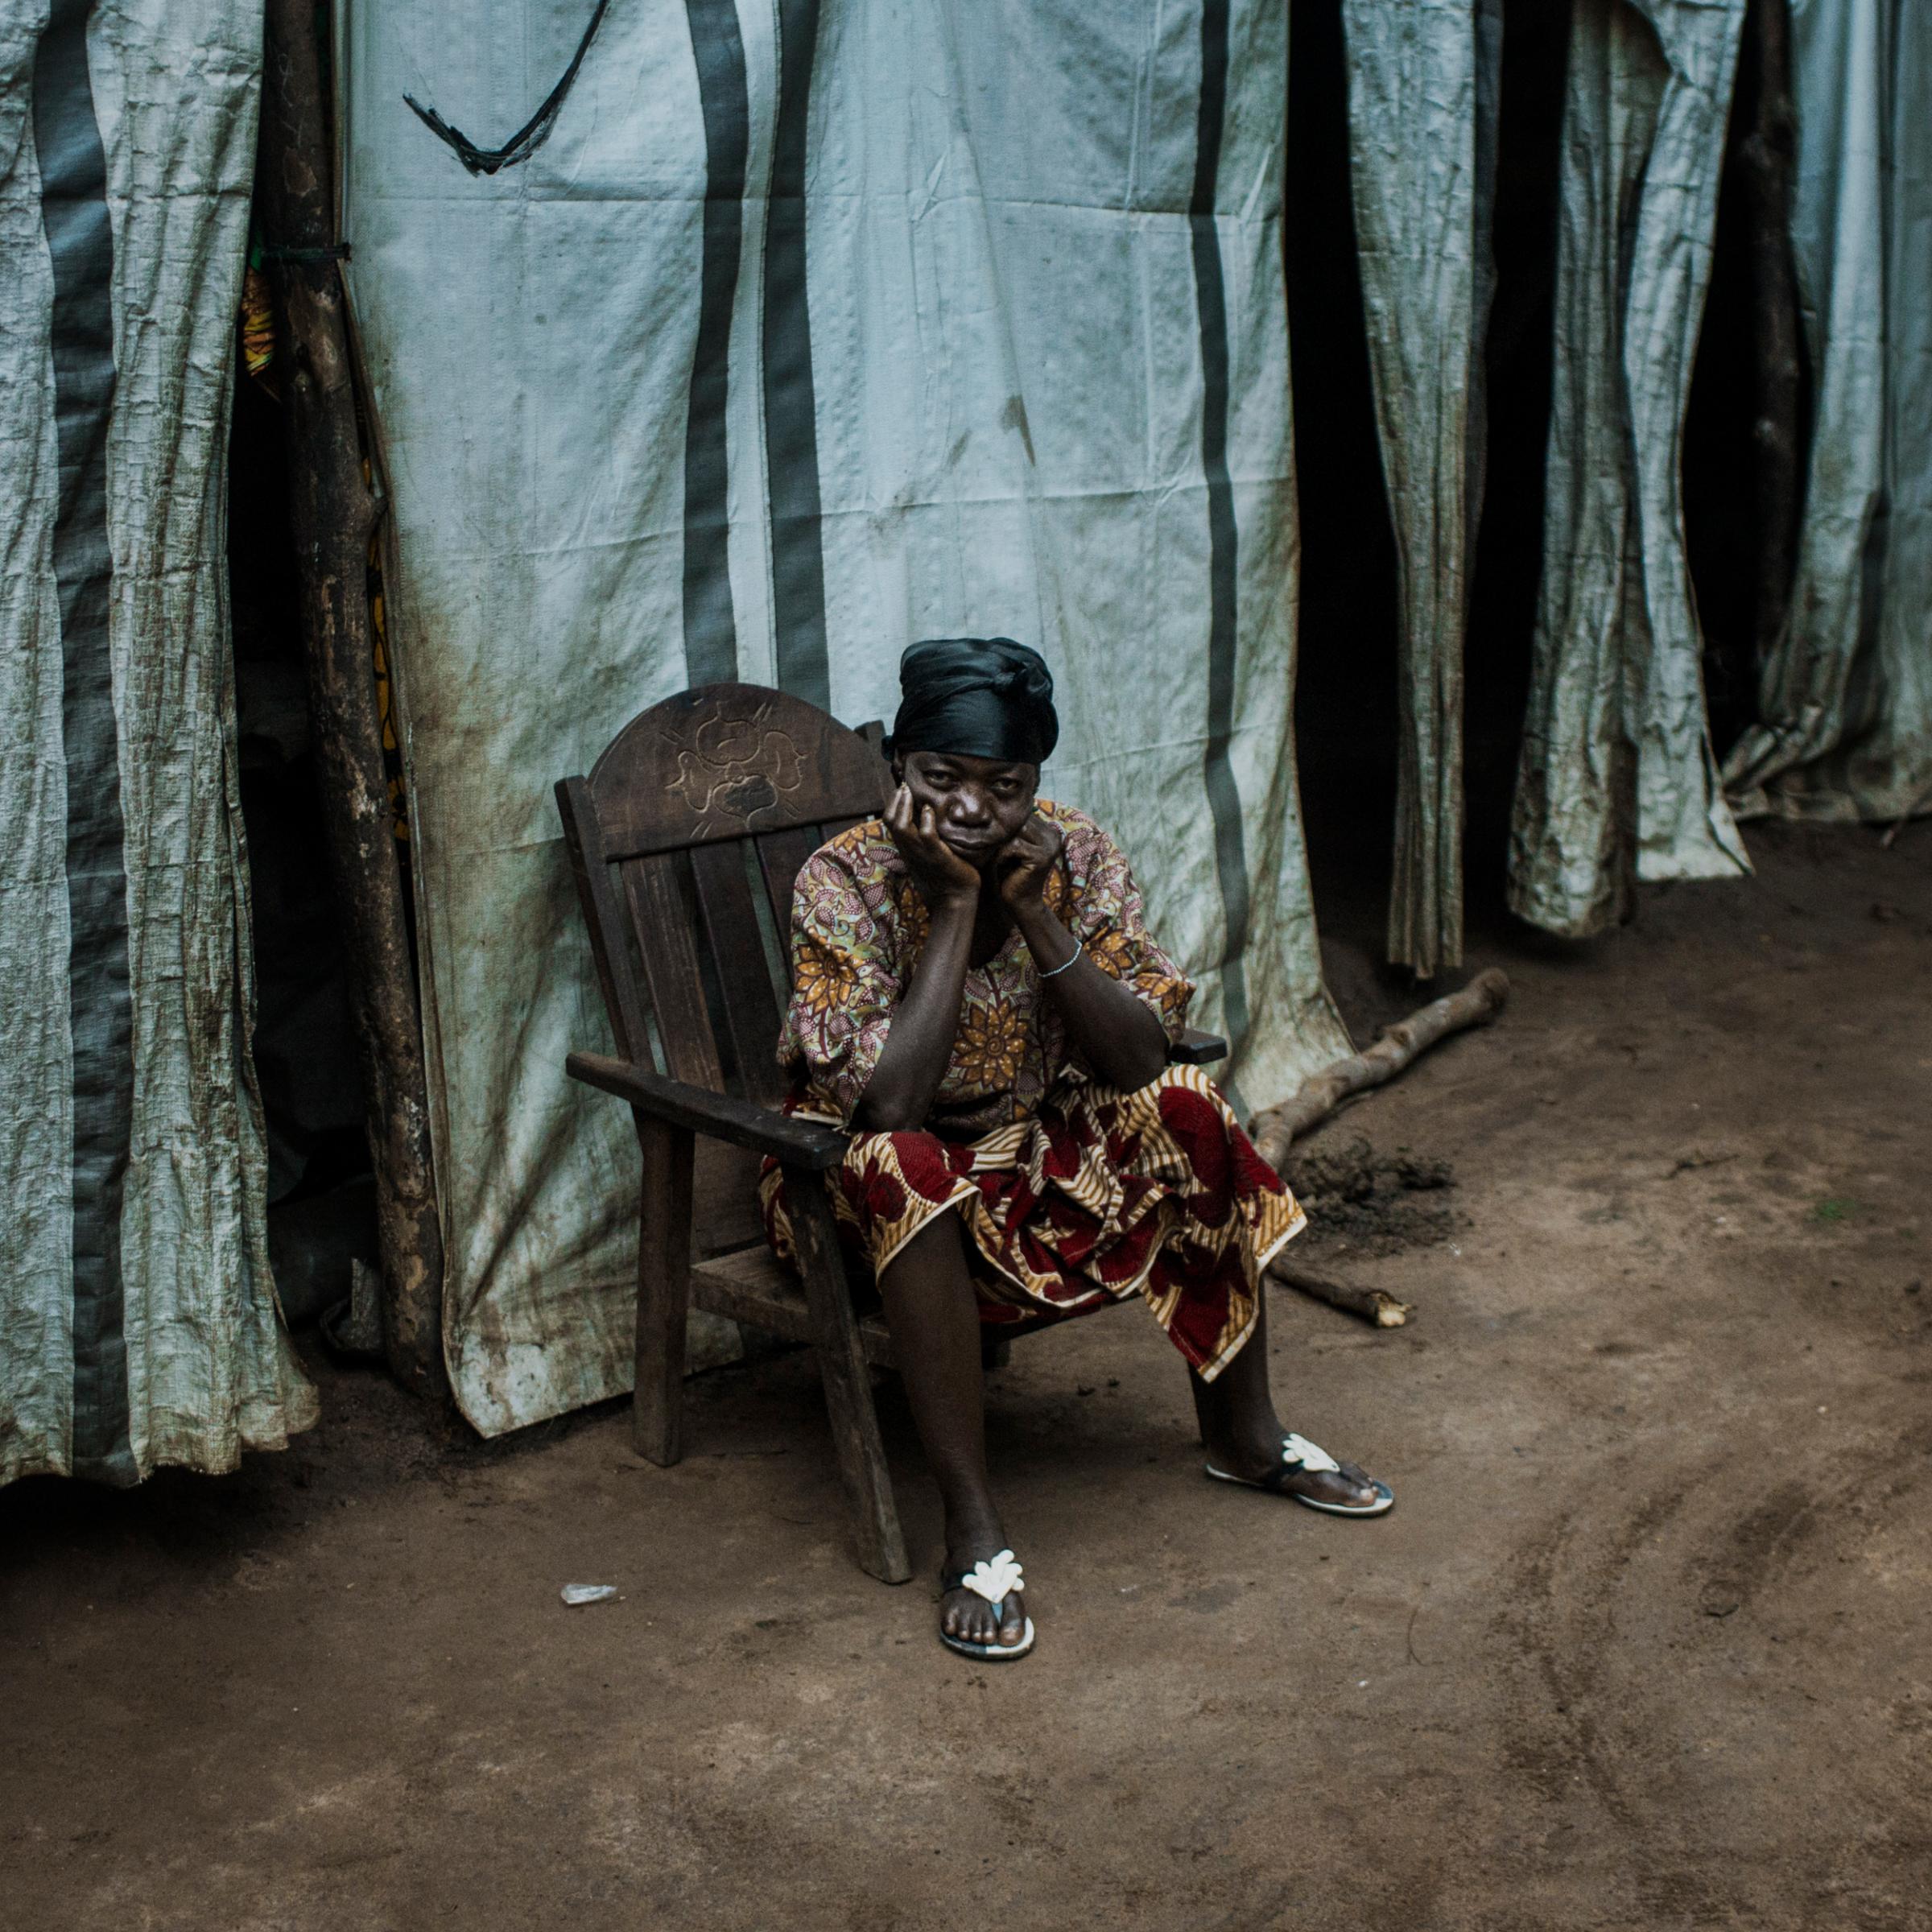 A displaced woman sits by her tent made by plastic sheeting in a camp for internally displaced people in Kaga Bandoro, Central African Republic, July 30, 2015.